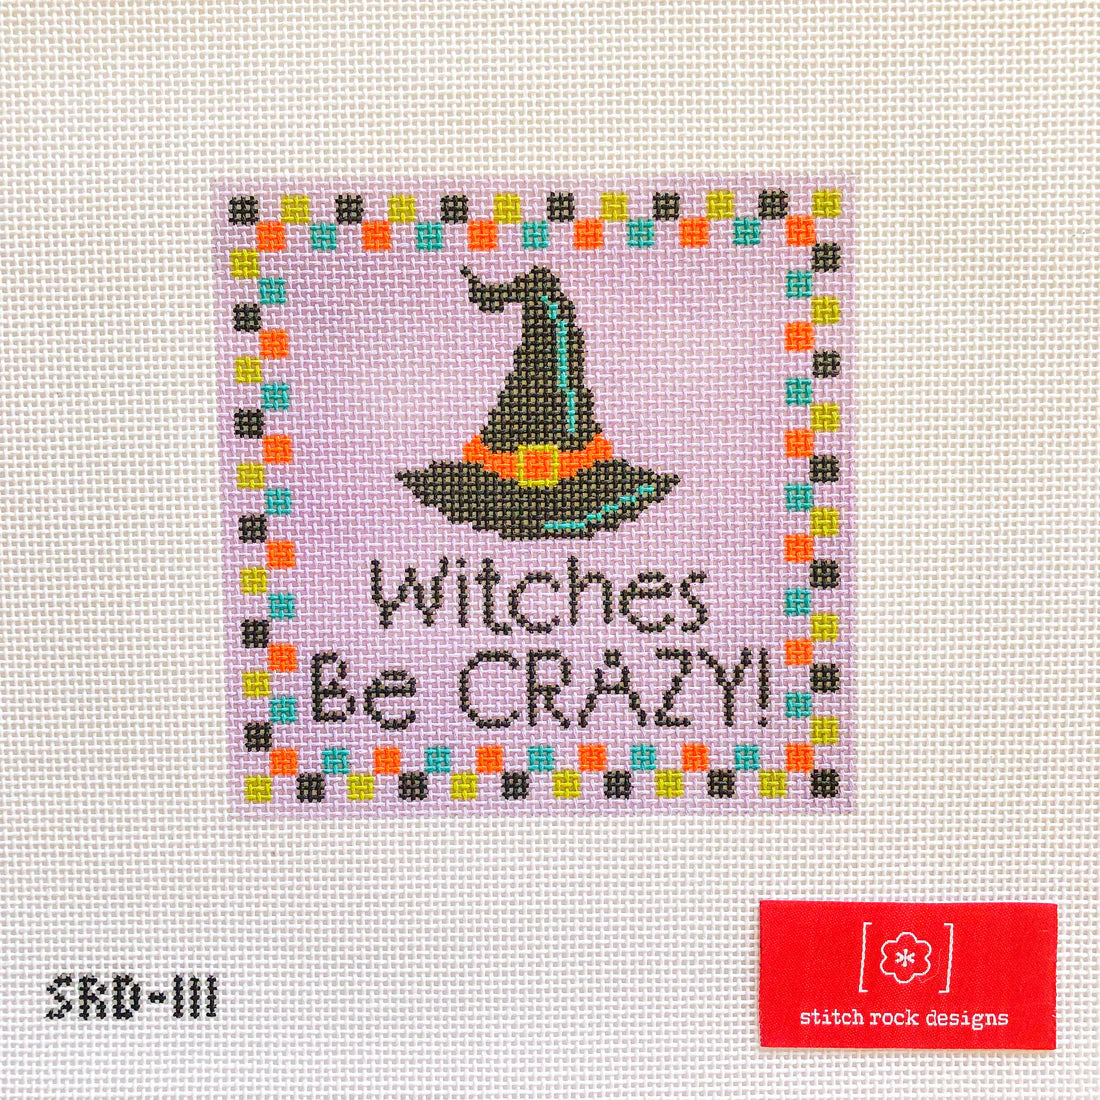 Witches Be Crazy! - The Flying Needles